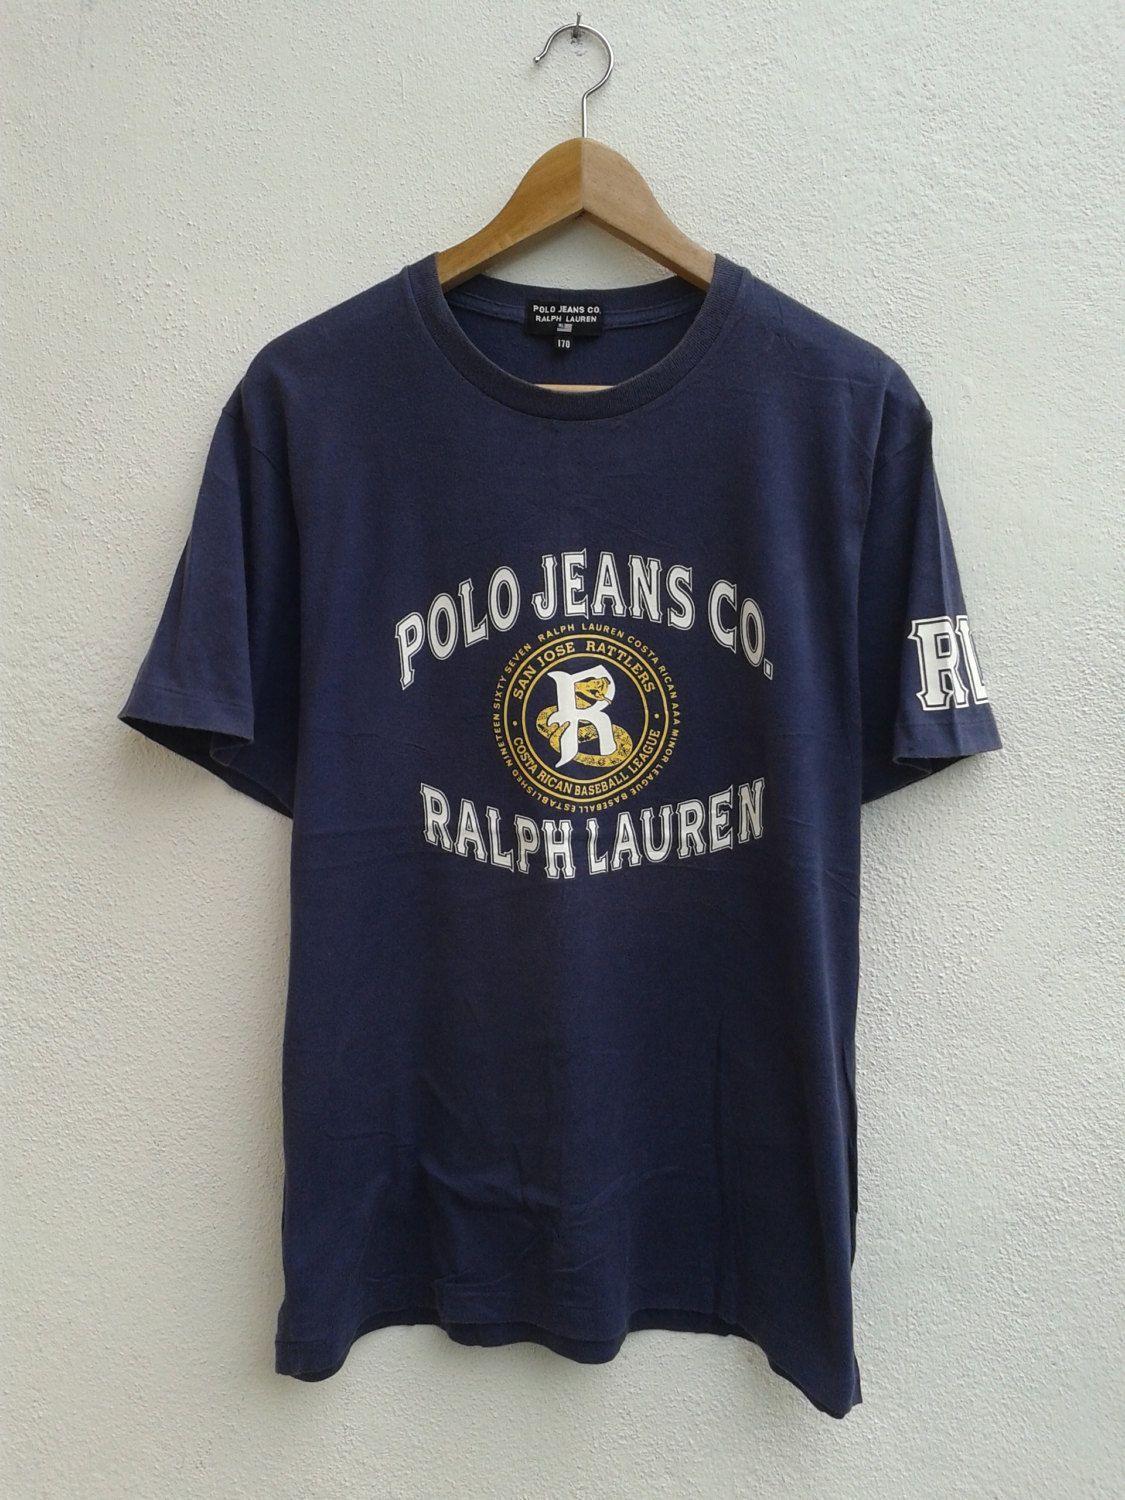 Reserved Clothes Logo - Reserved for Z Vintage 90s POLO Jeans Ralph Lauren Costa Rica MLB